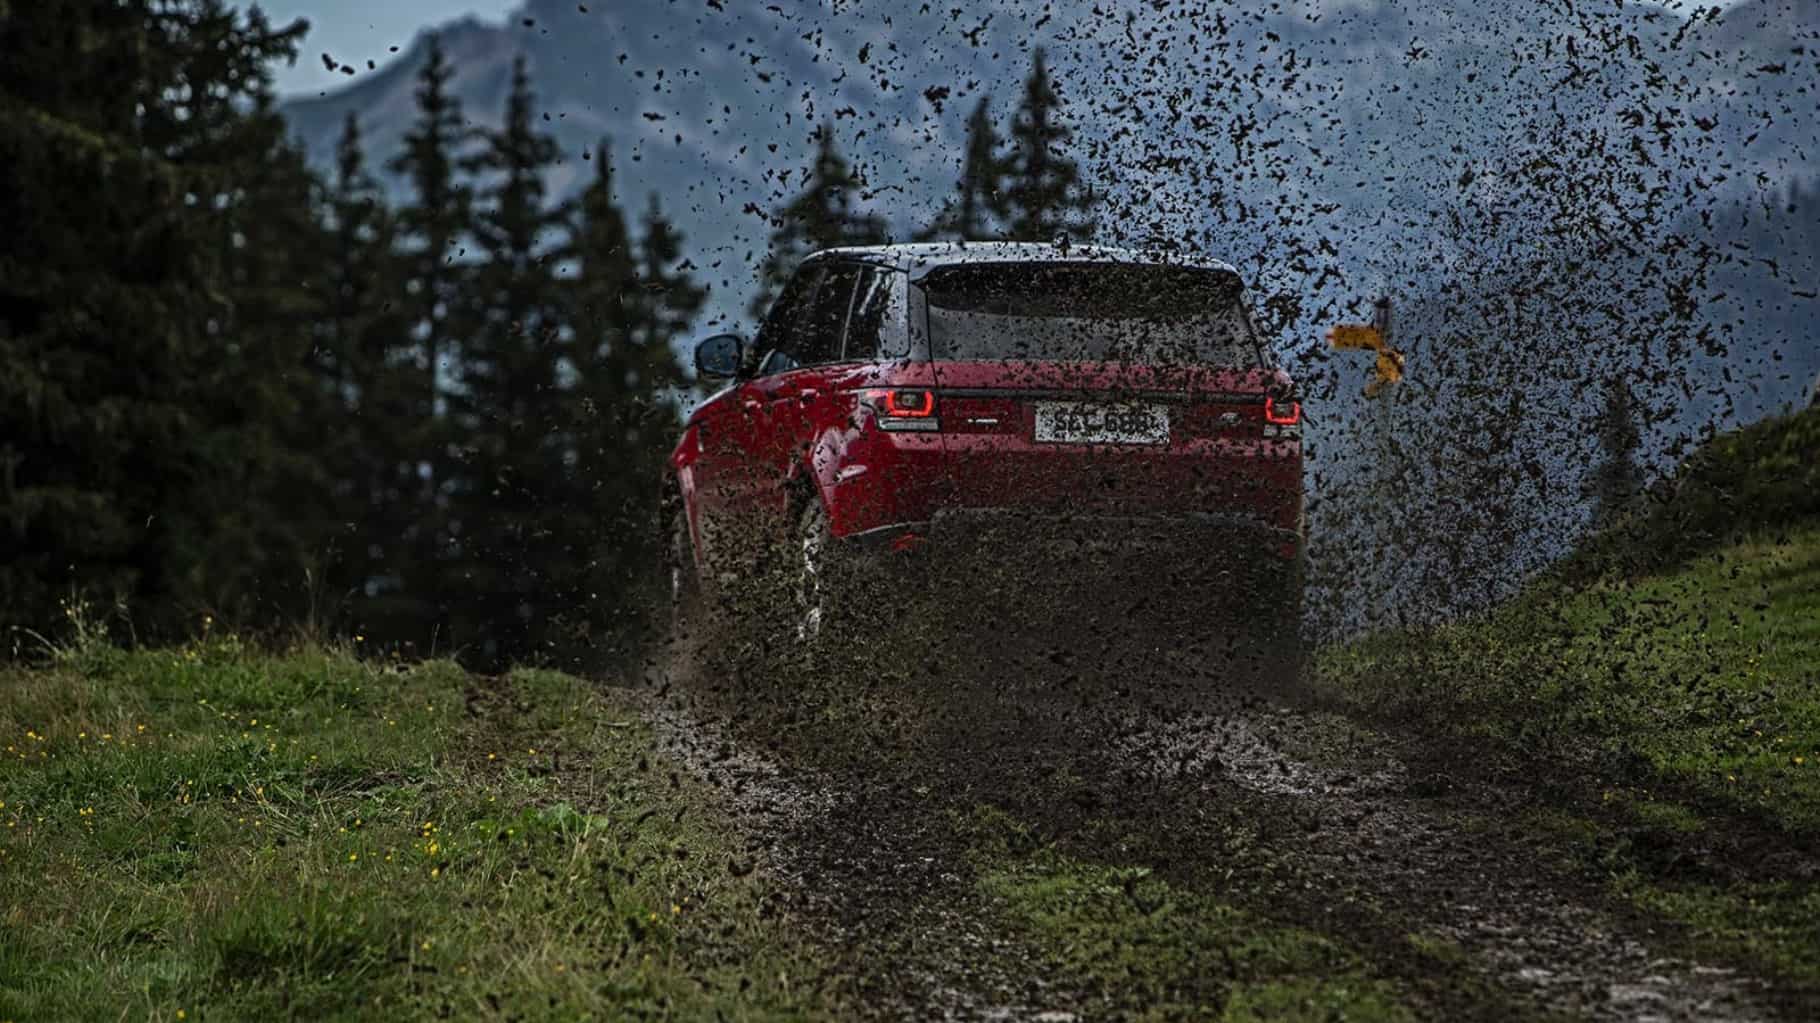 Range Rover in red driving in mud back view